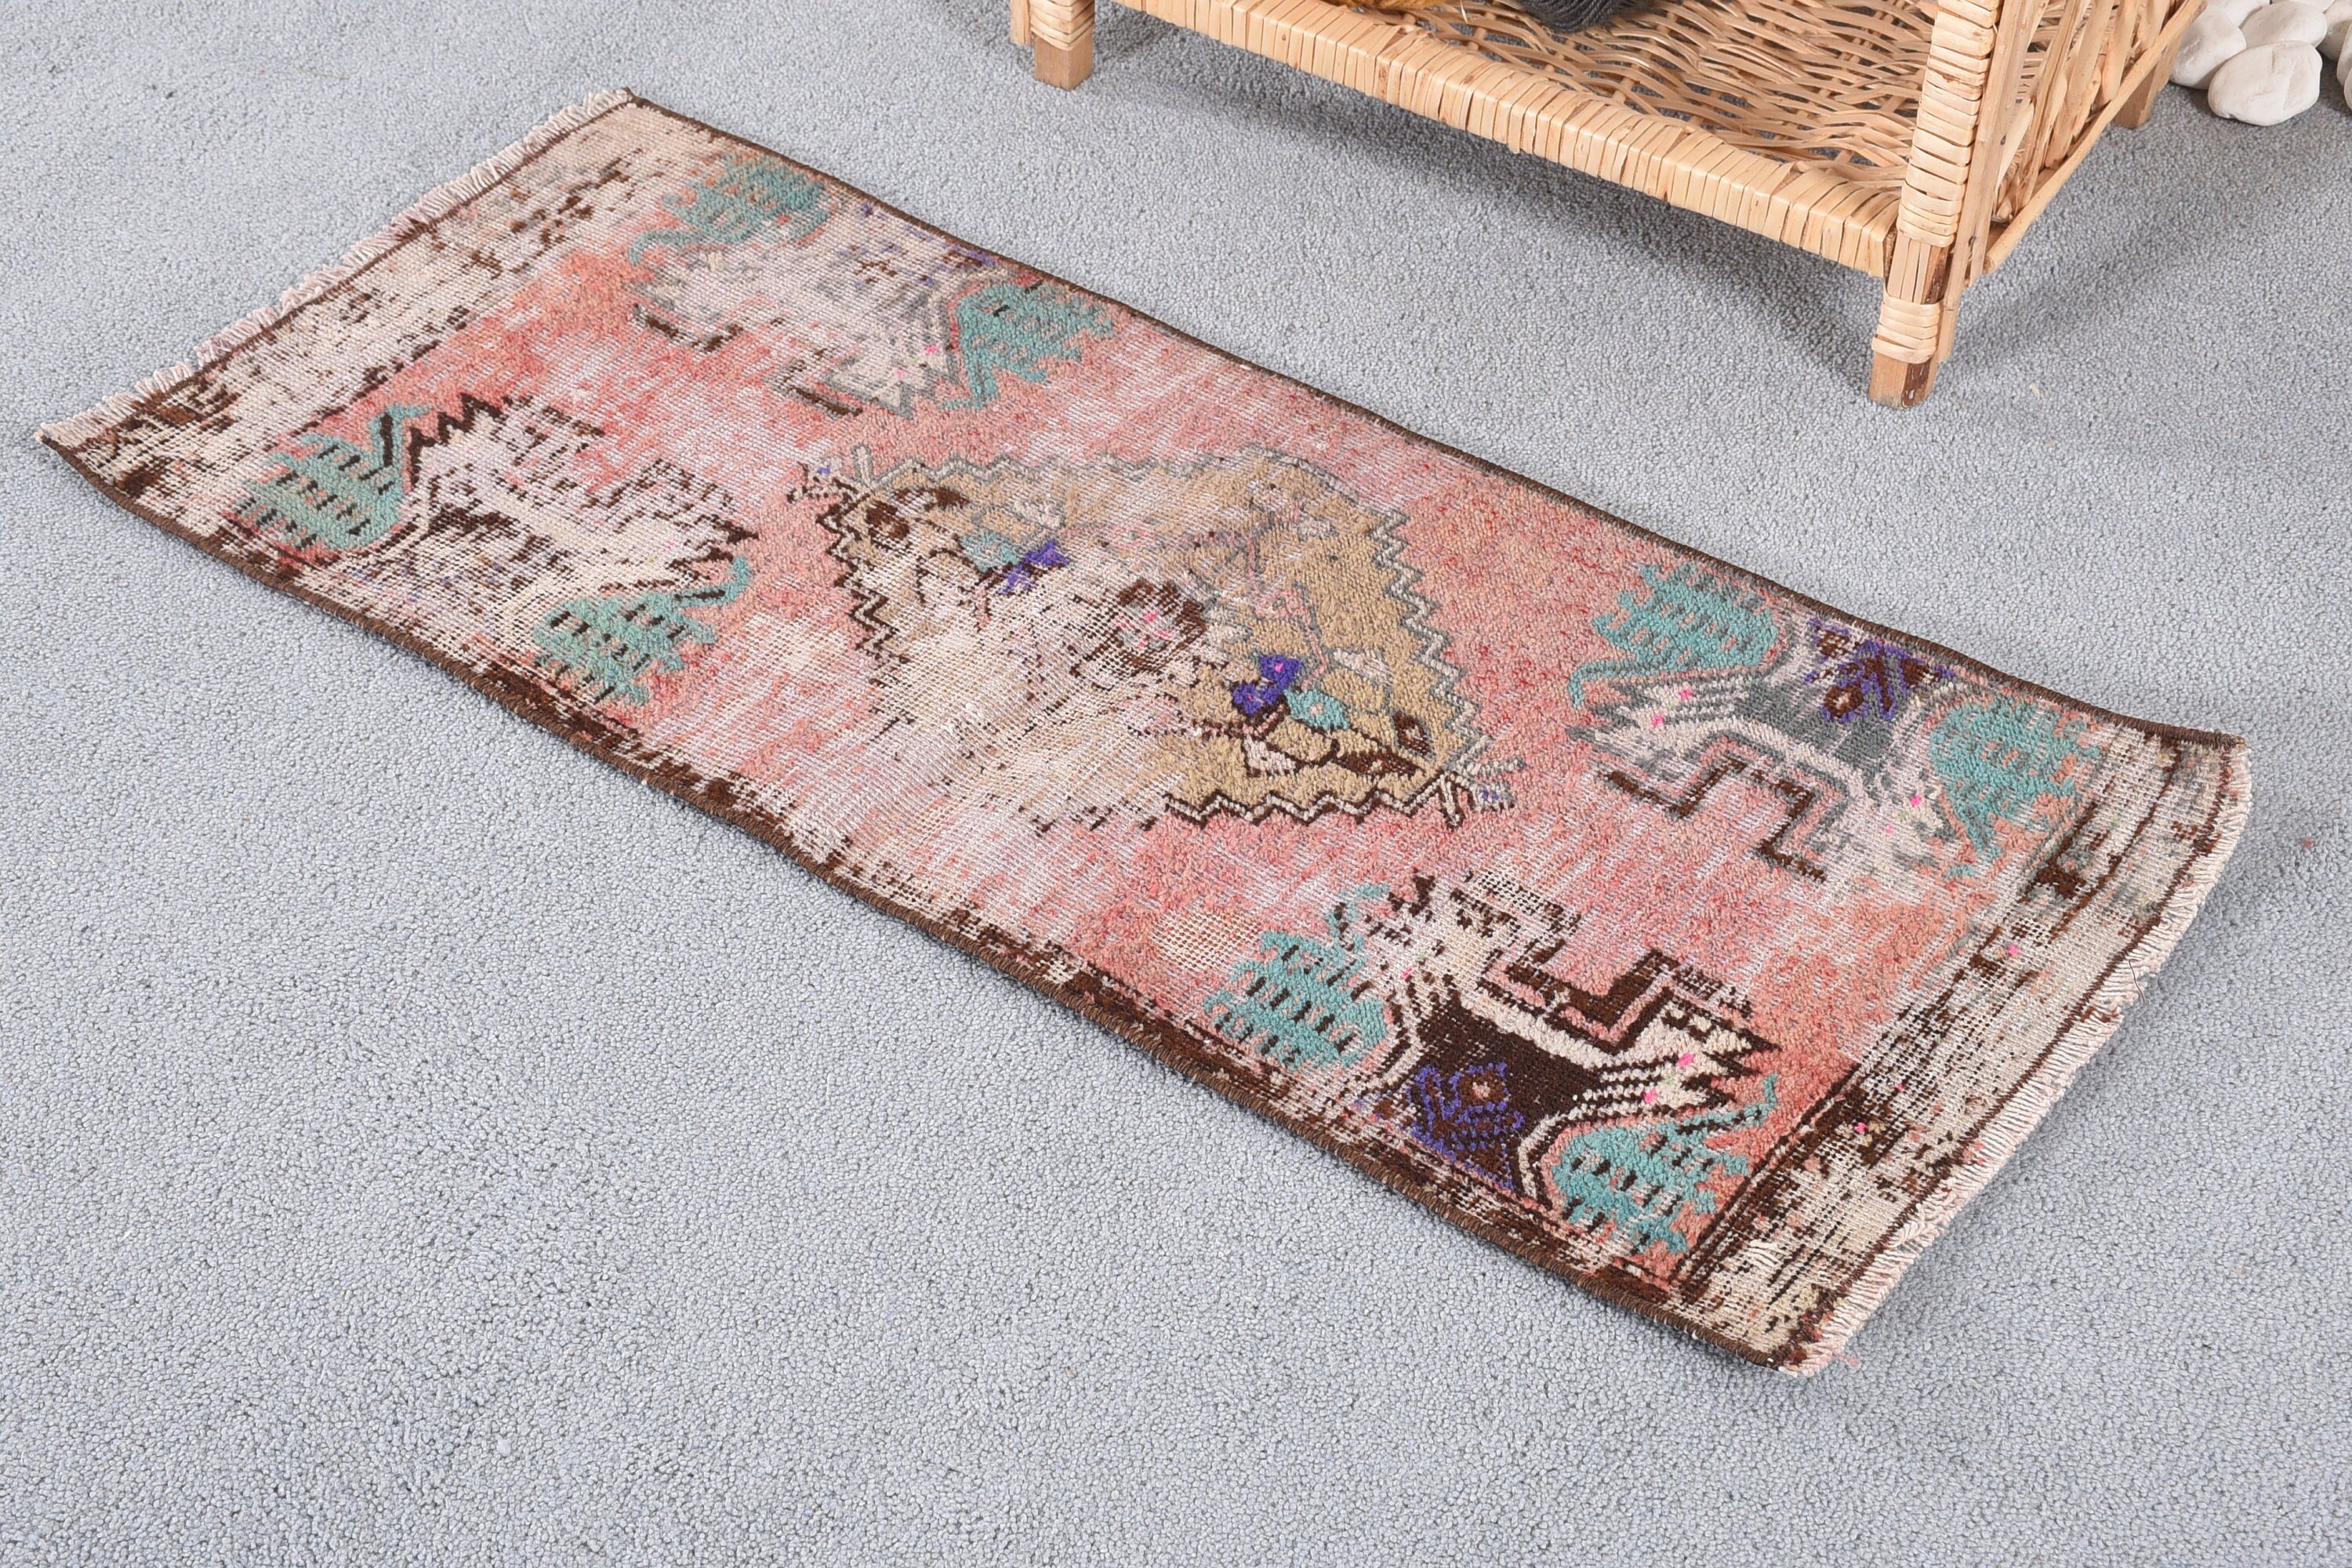 Cool Rug, Vintage Rugs, 1.2x2.9 ft Small Rugs, Car Mat Rugs, Rugs for Entry, Bath Rug, Turkish Rugs, Brown Oushak Rugs, Moroccan Rug